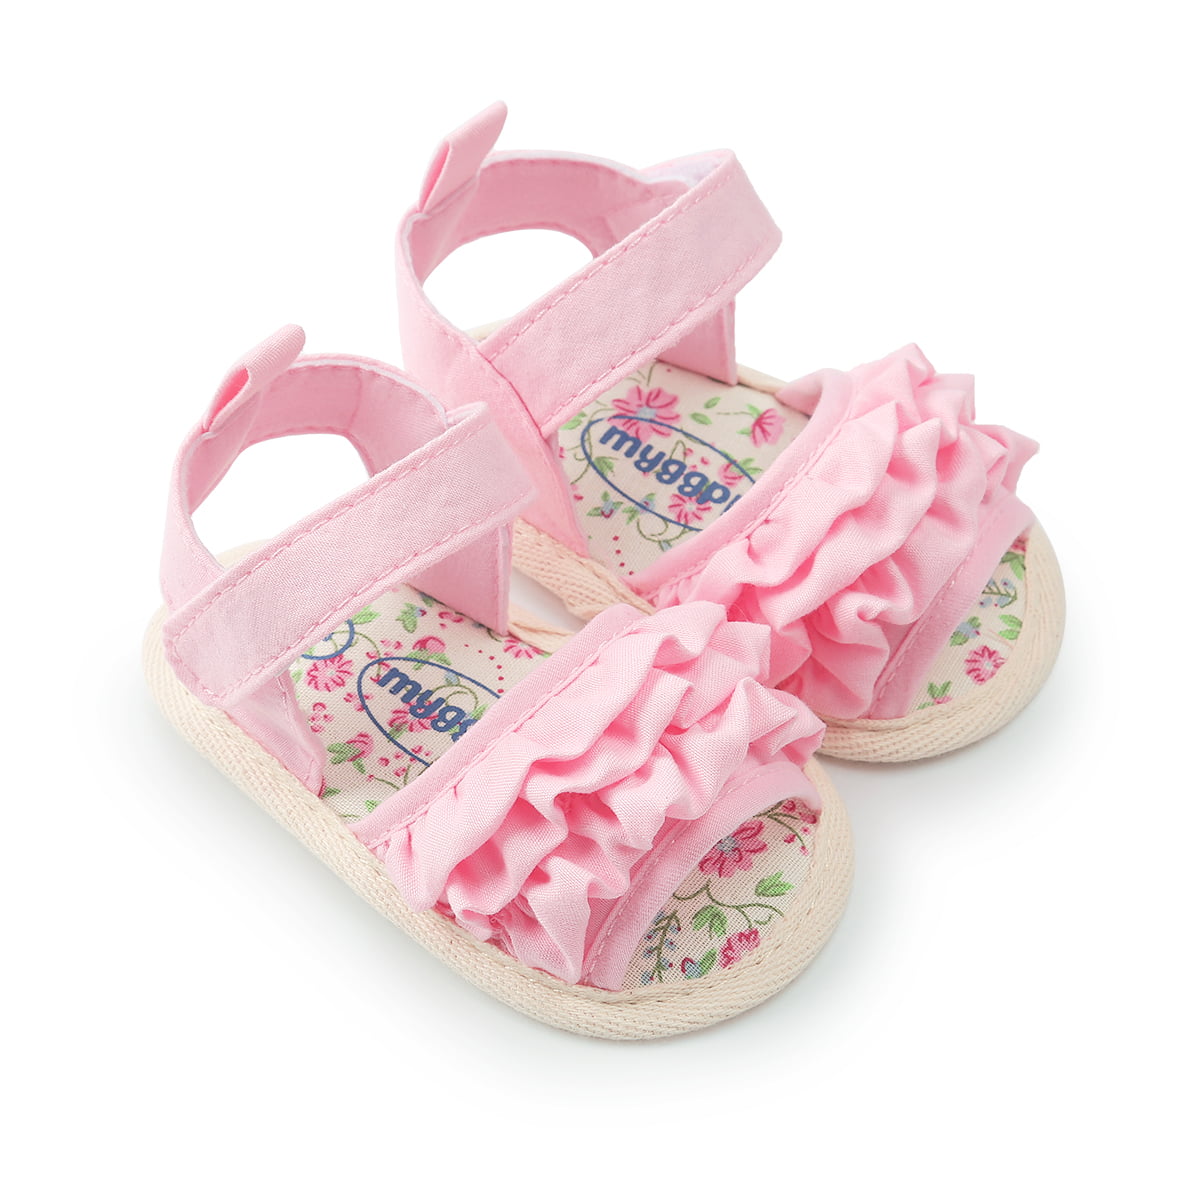 Baby Infant Kids Girl Toddler Fashion Canvas Soft Sole Crib Sandals Casual Newborn Summer Shoes SHOBDW Boys Shoes 